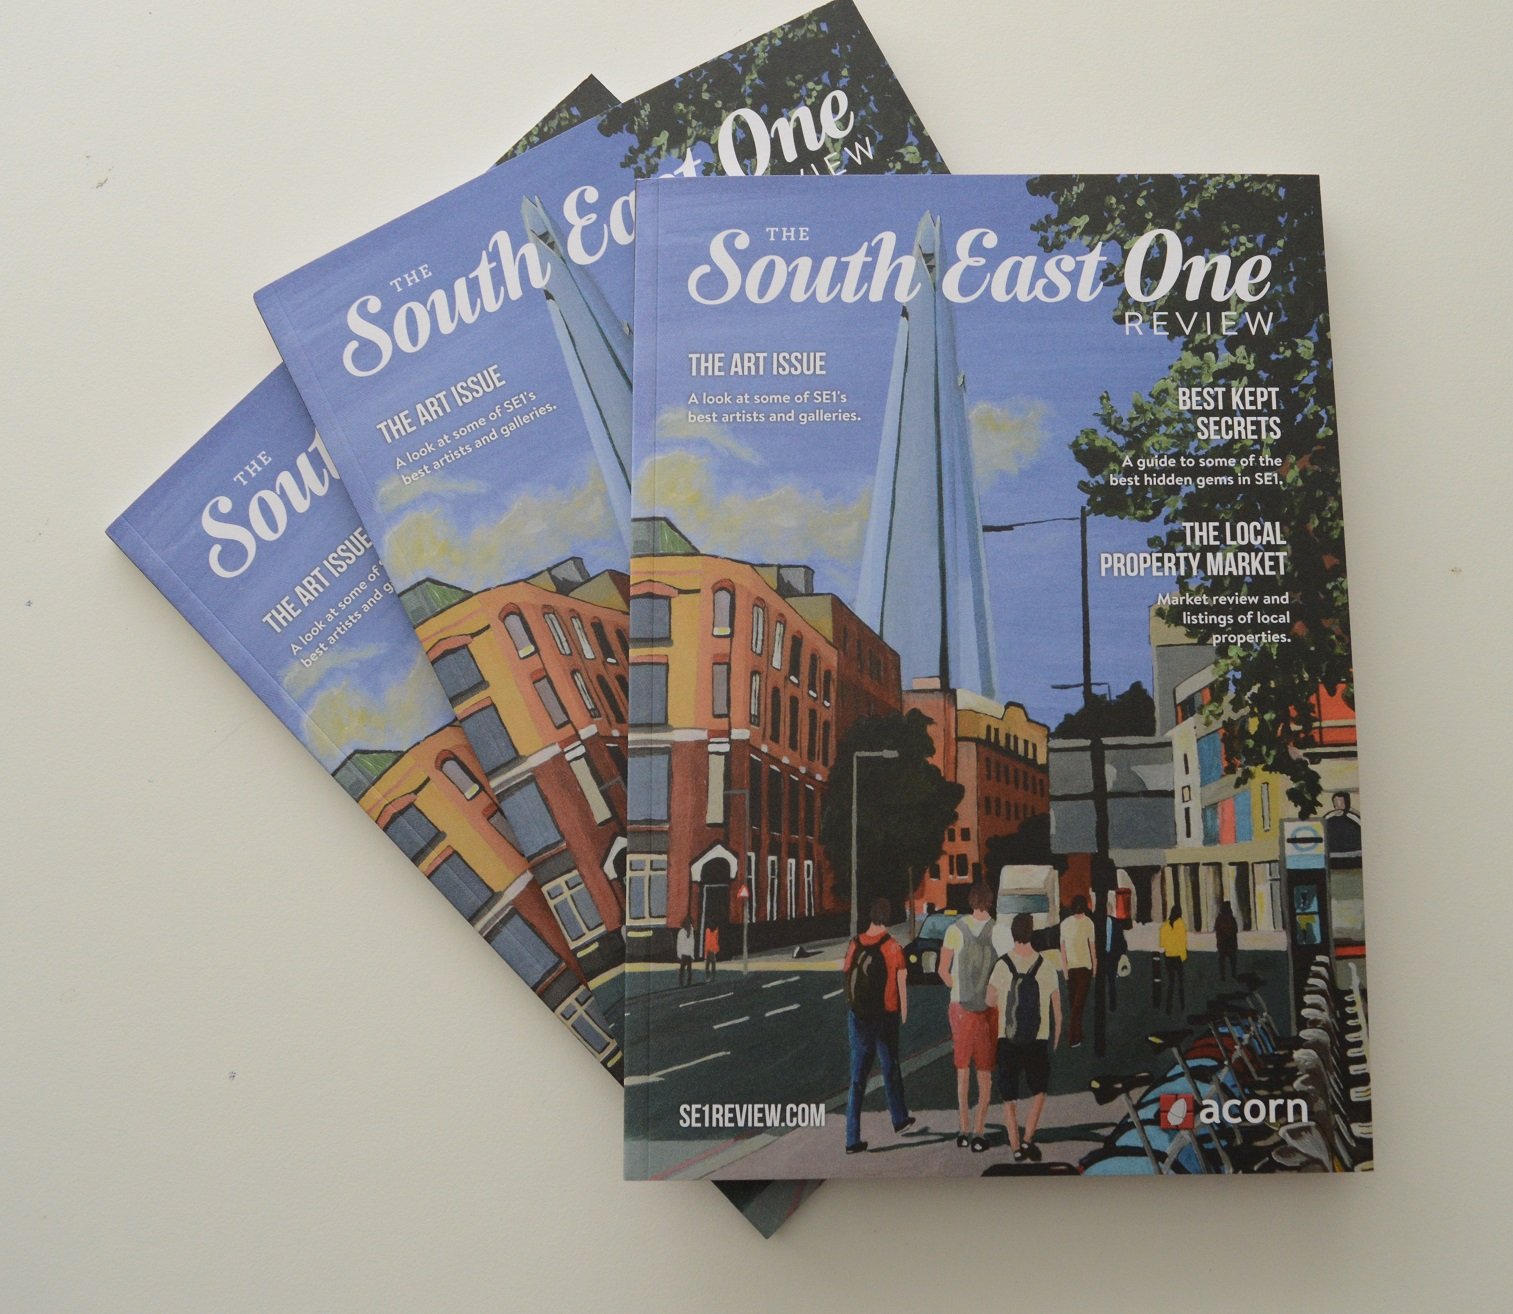 South East One Magazine.  